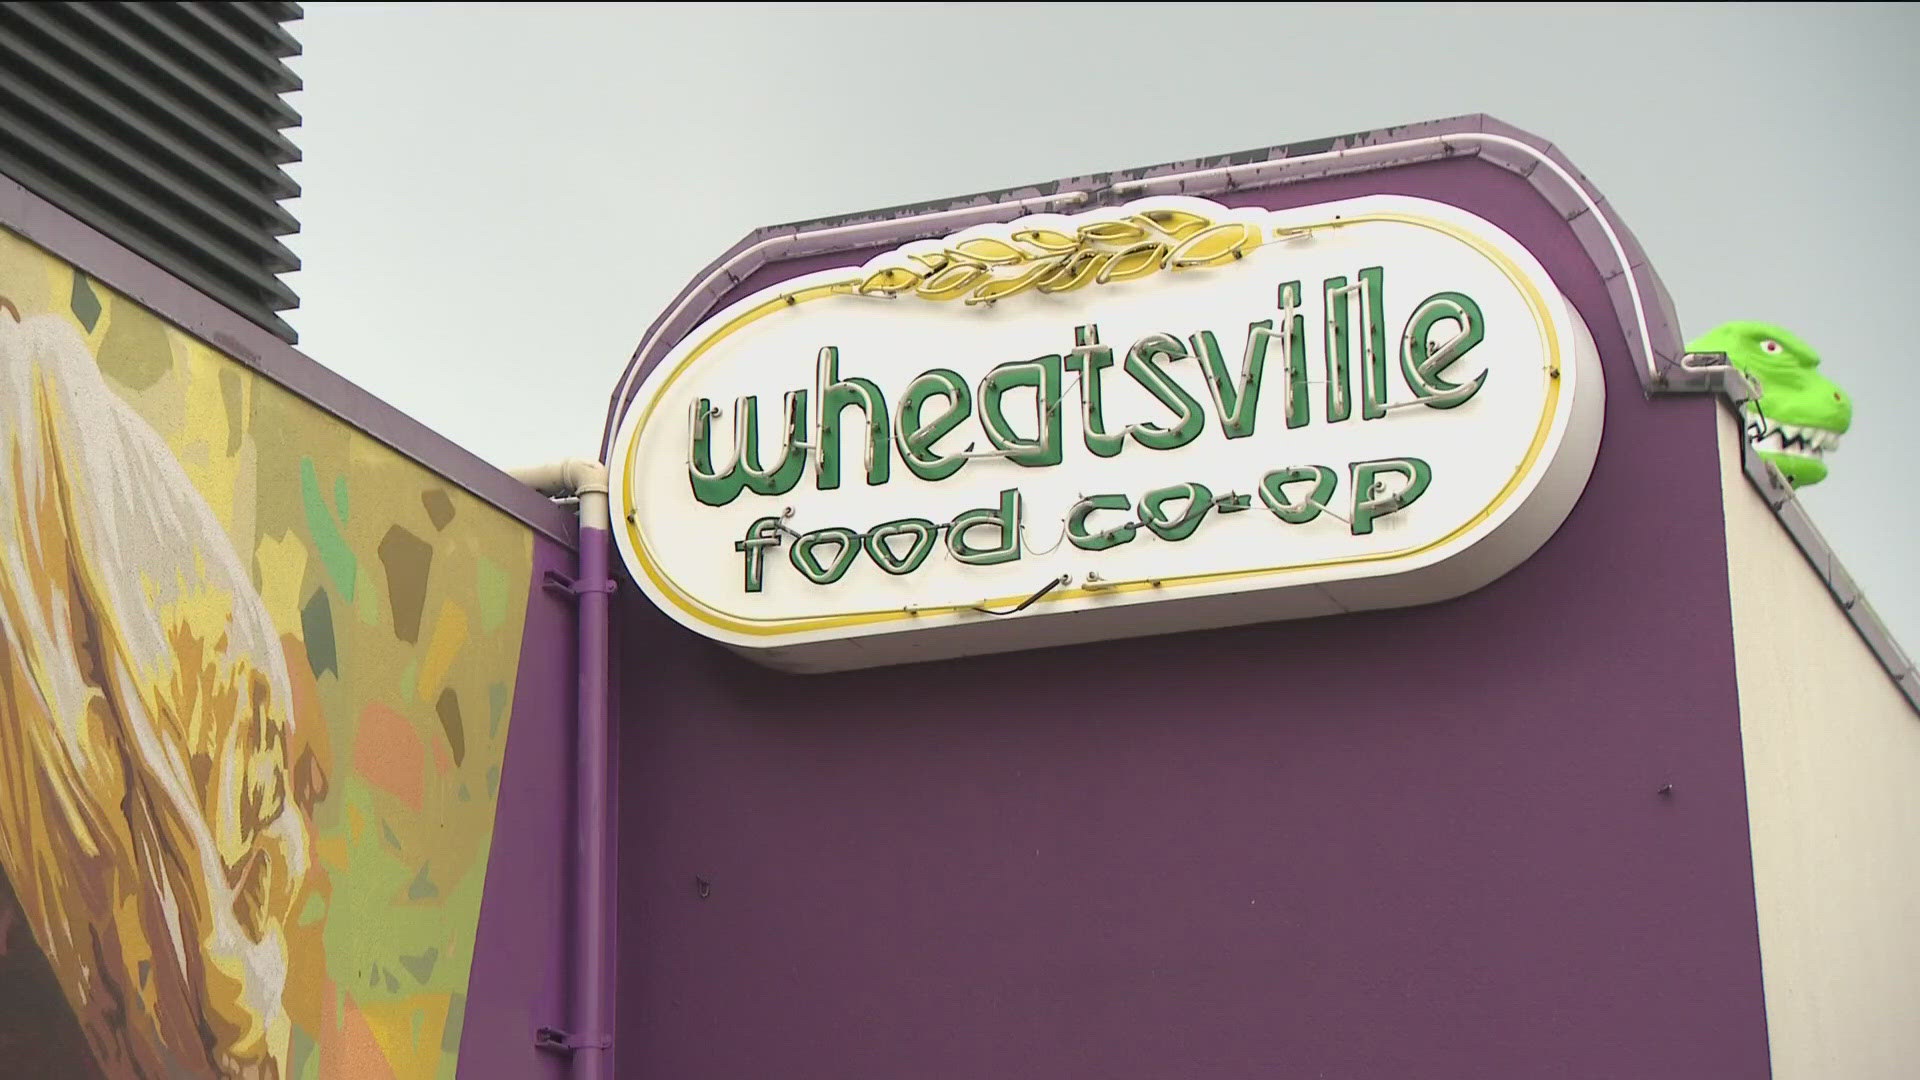 Wheatsville Co-op has occupied the building at 3101 Guadalupe St. for 43 years.